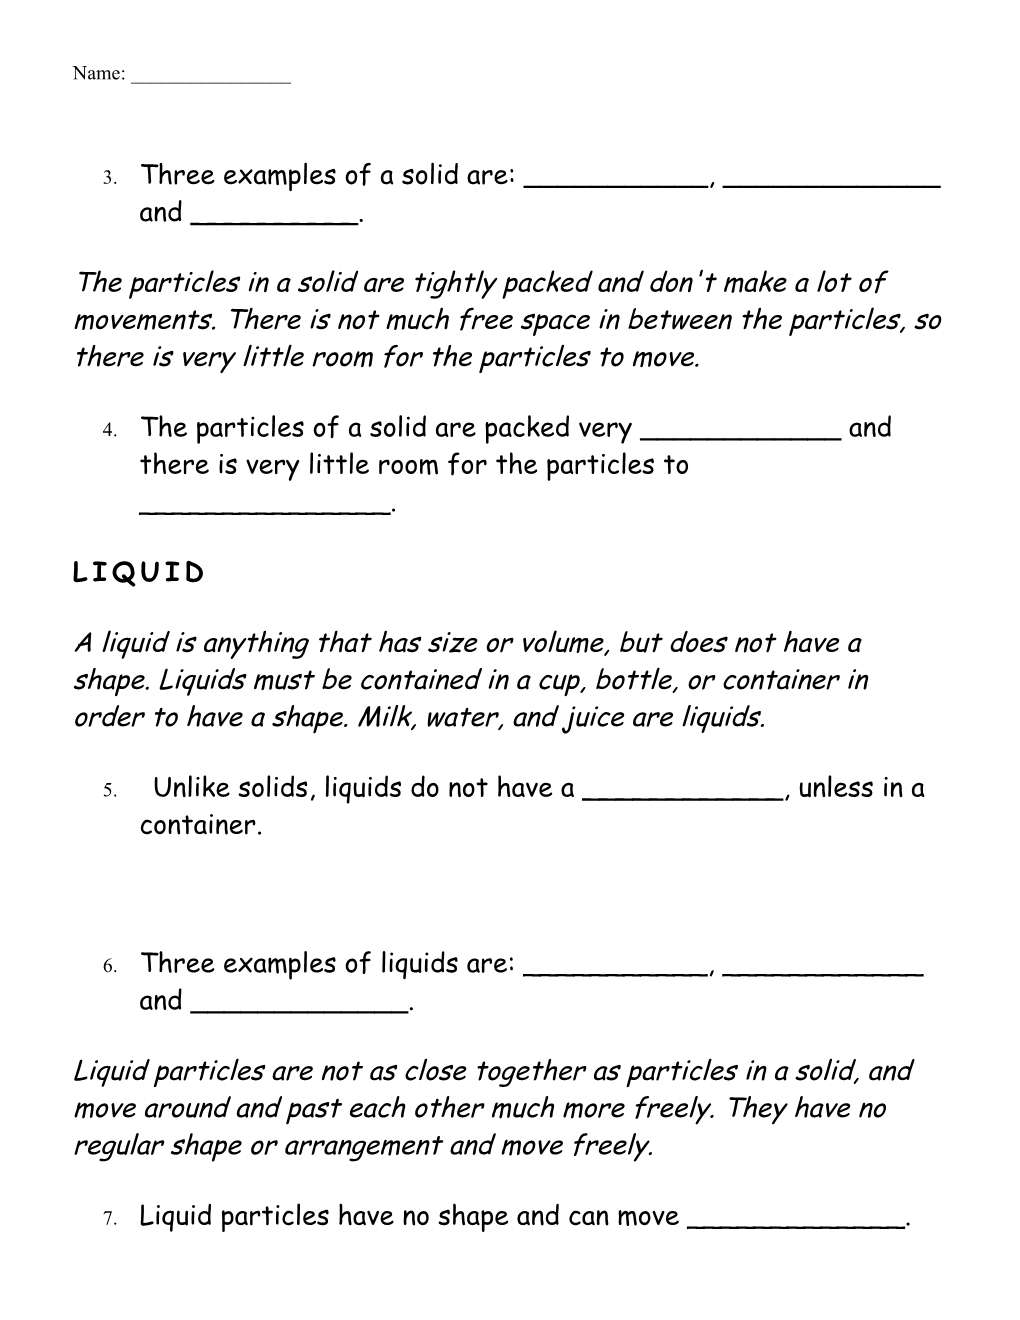 Phases of Matter Study Guide